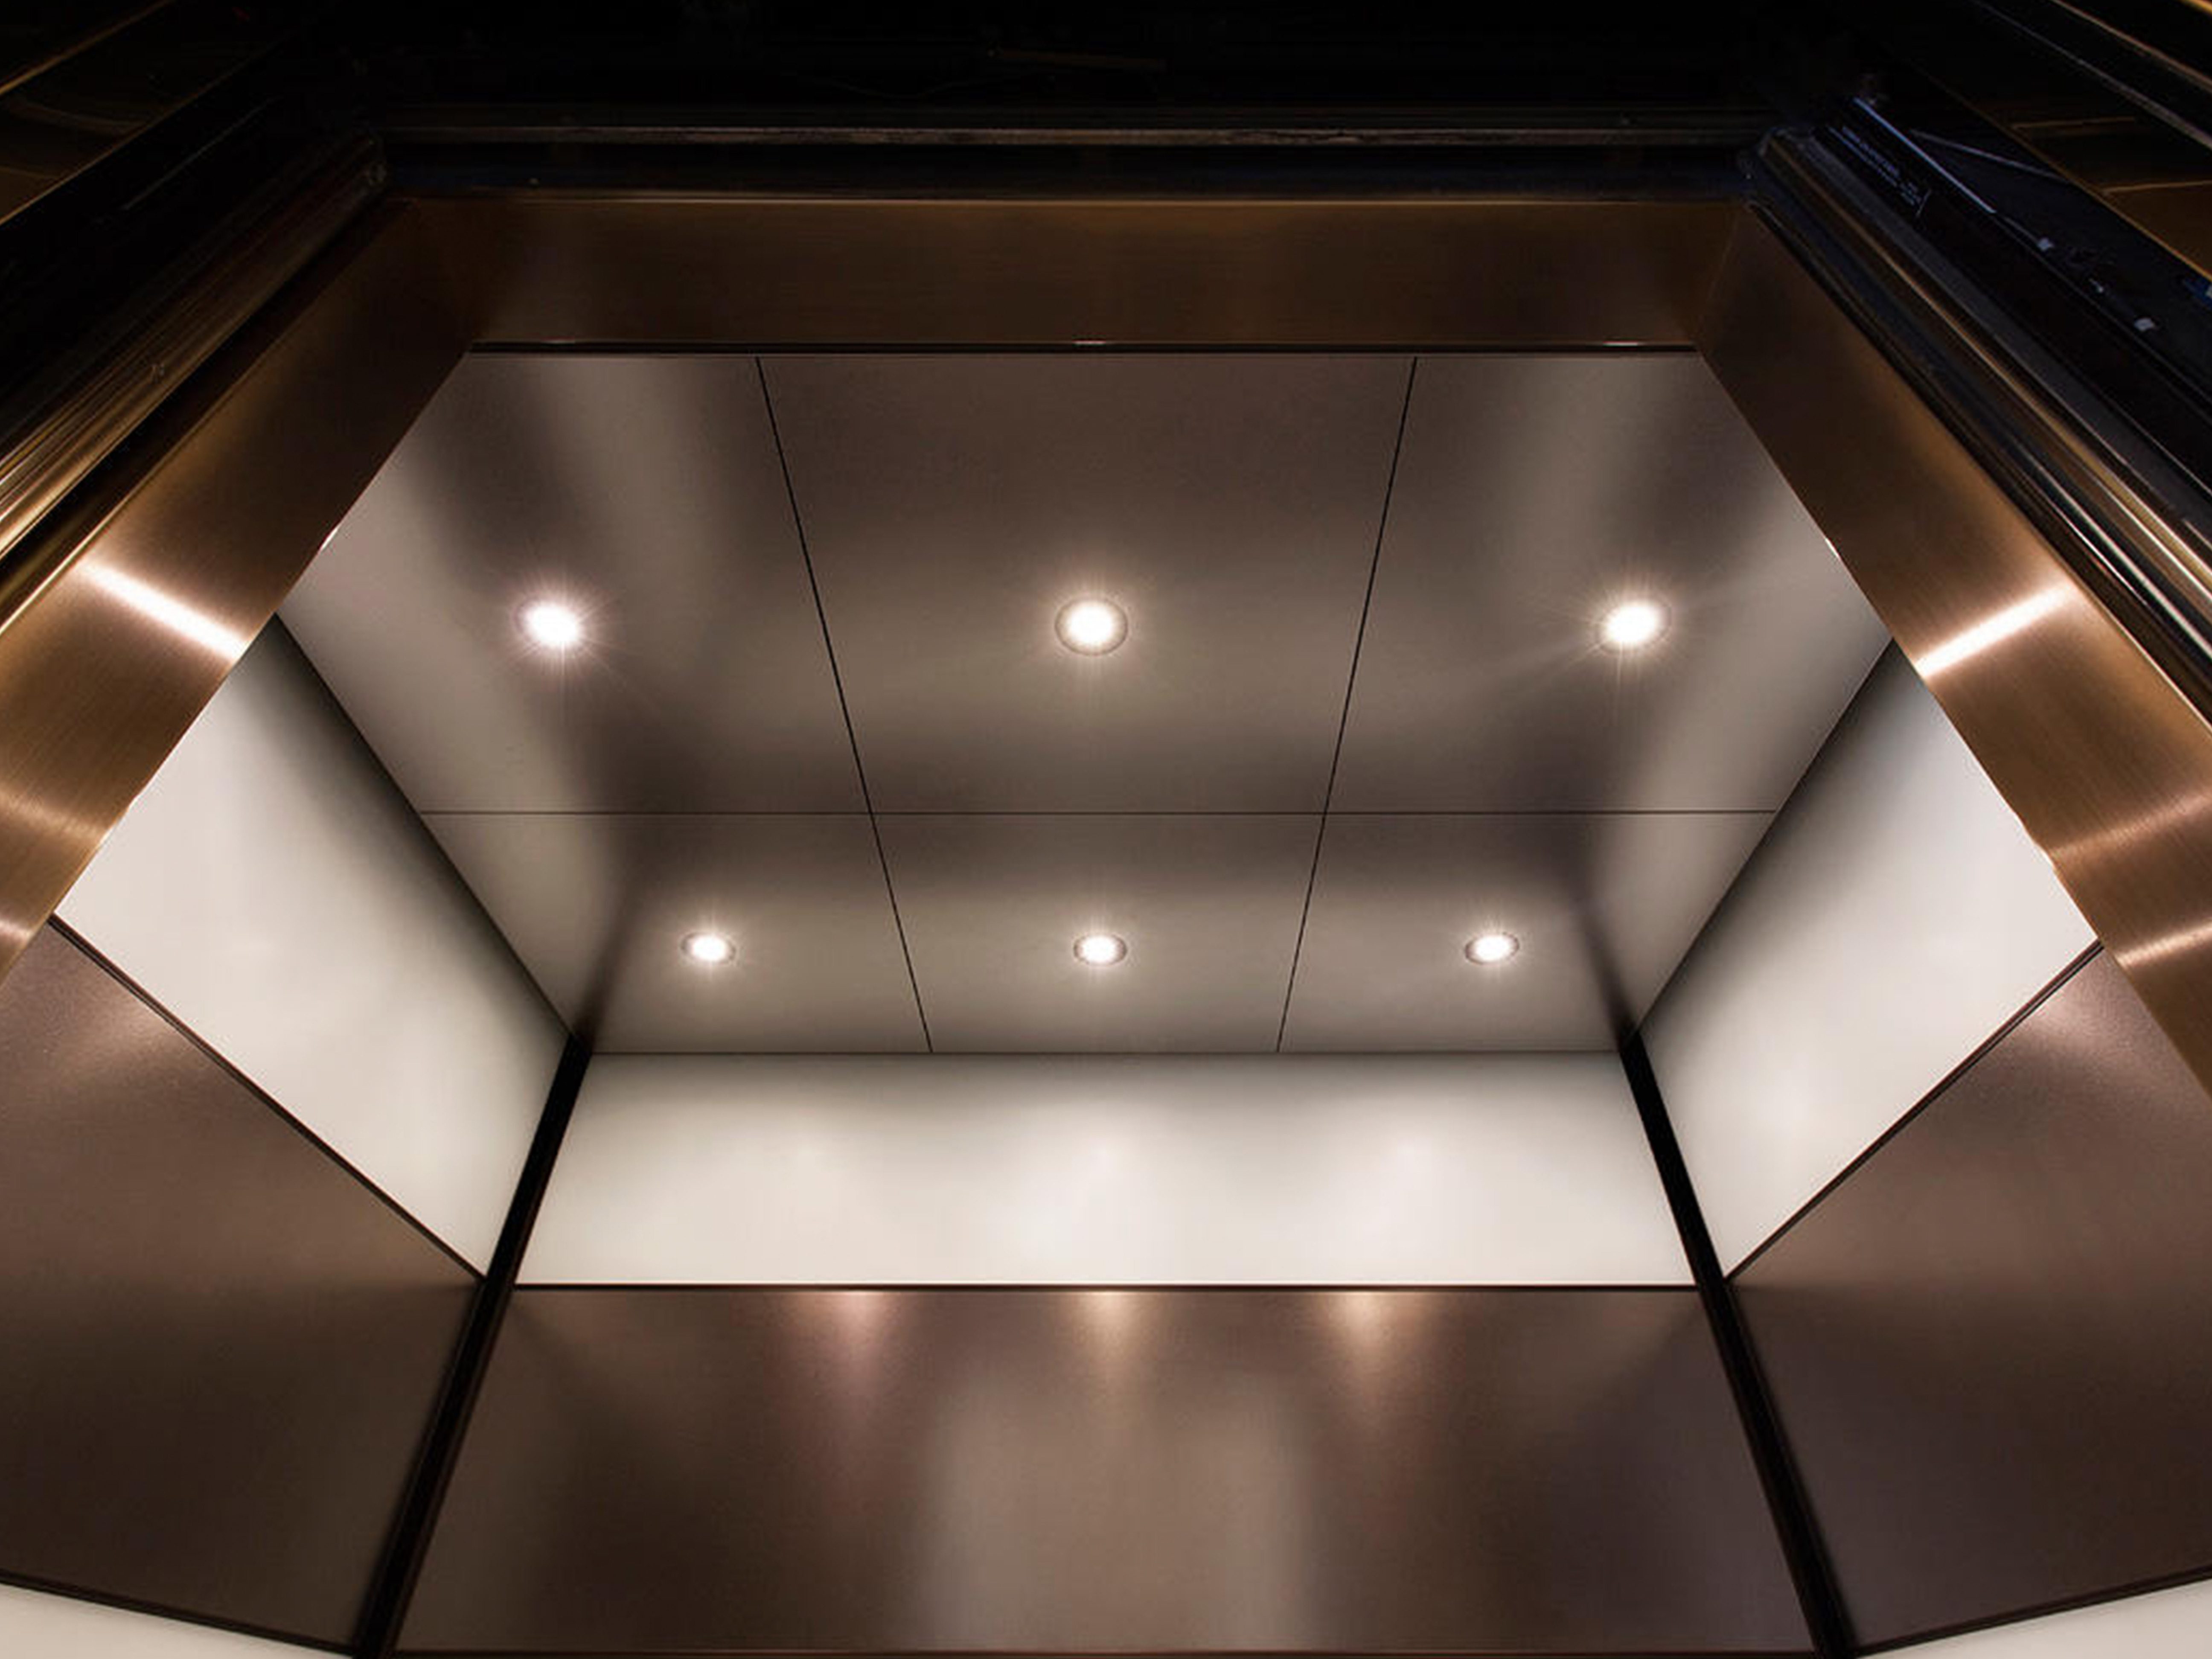 Doors of the Elevator are open and inside Roof of the Elevator can be seen which has circle lights attached.